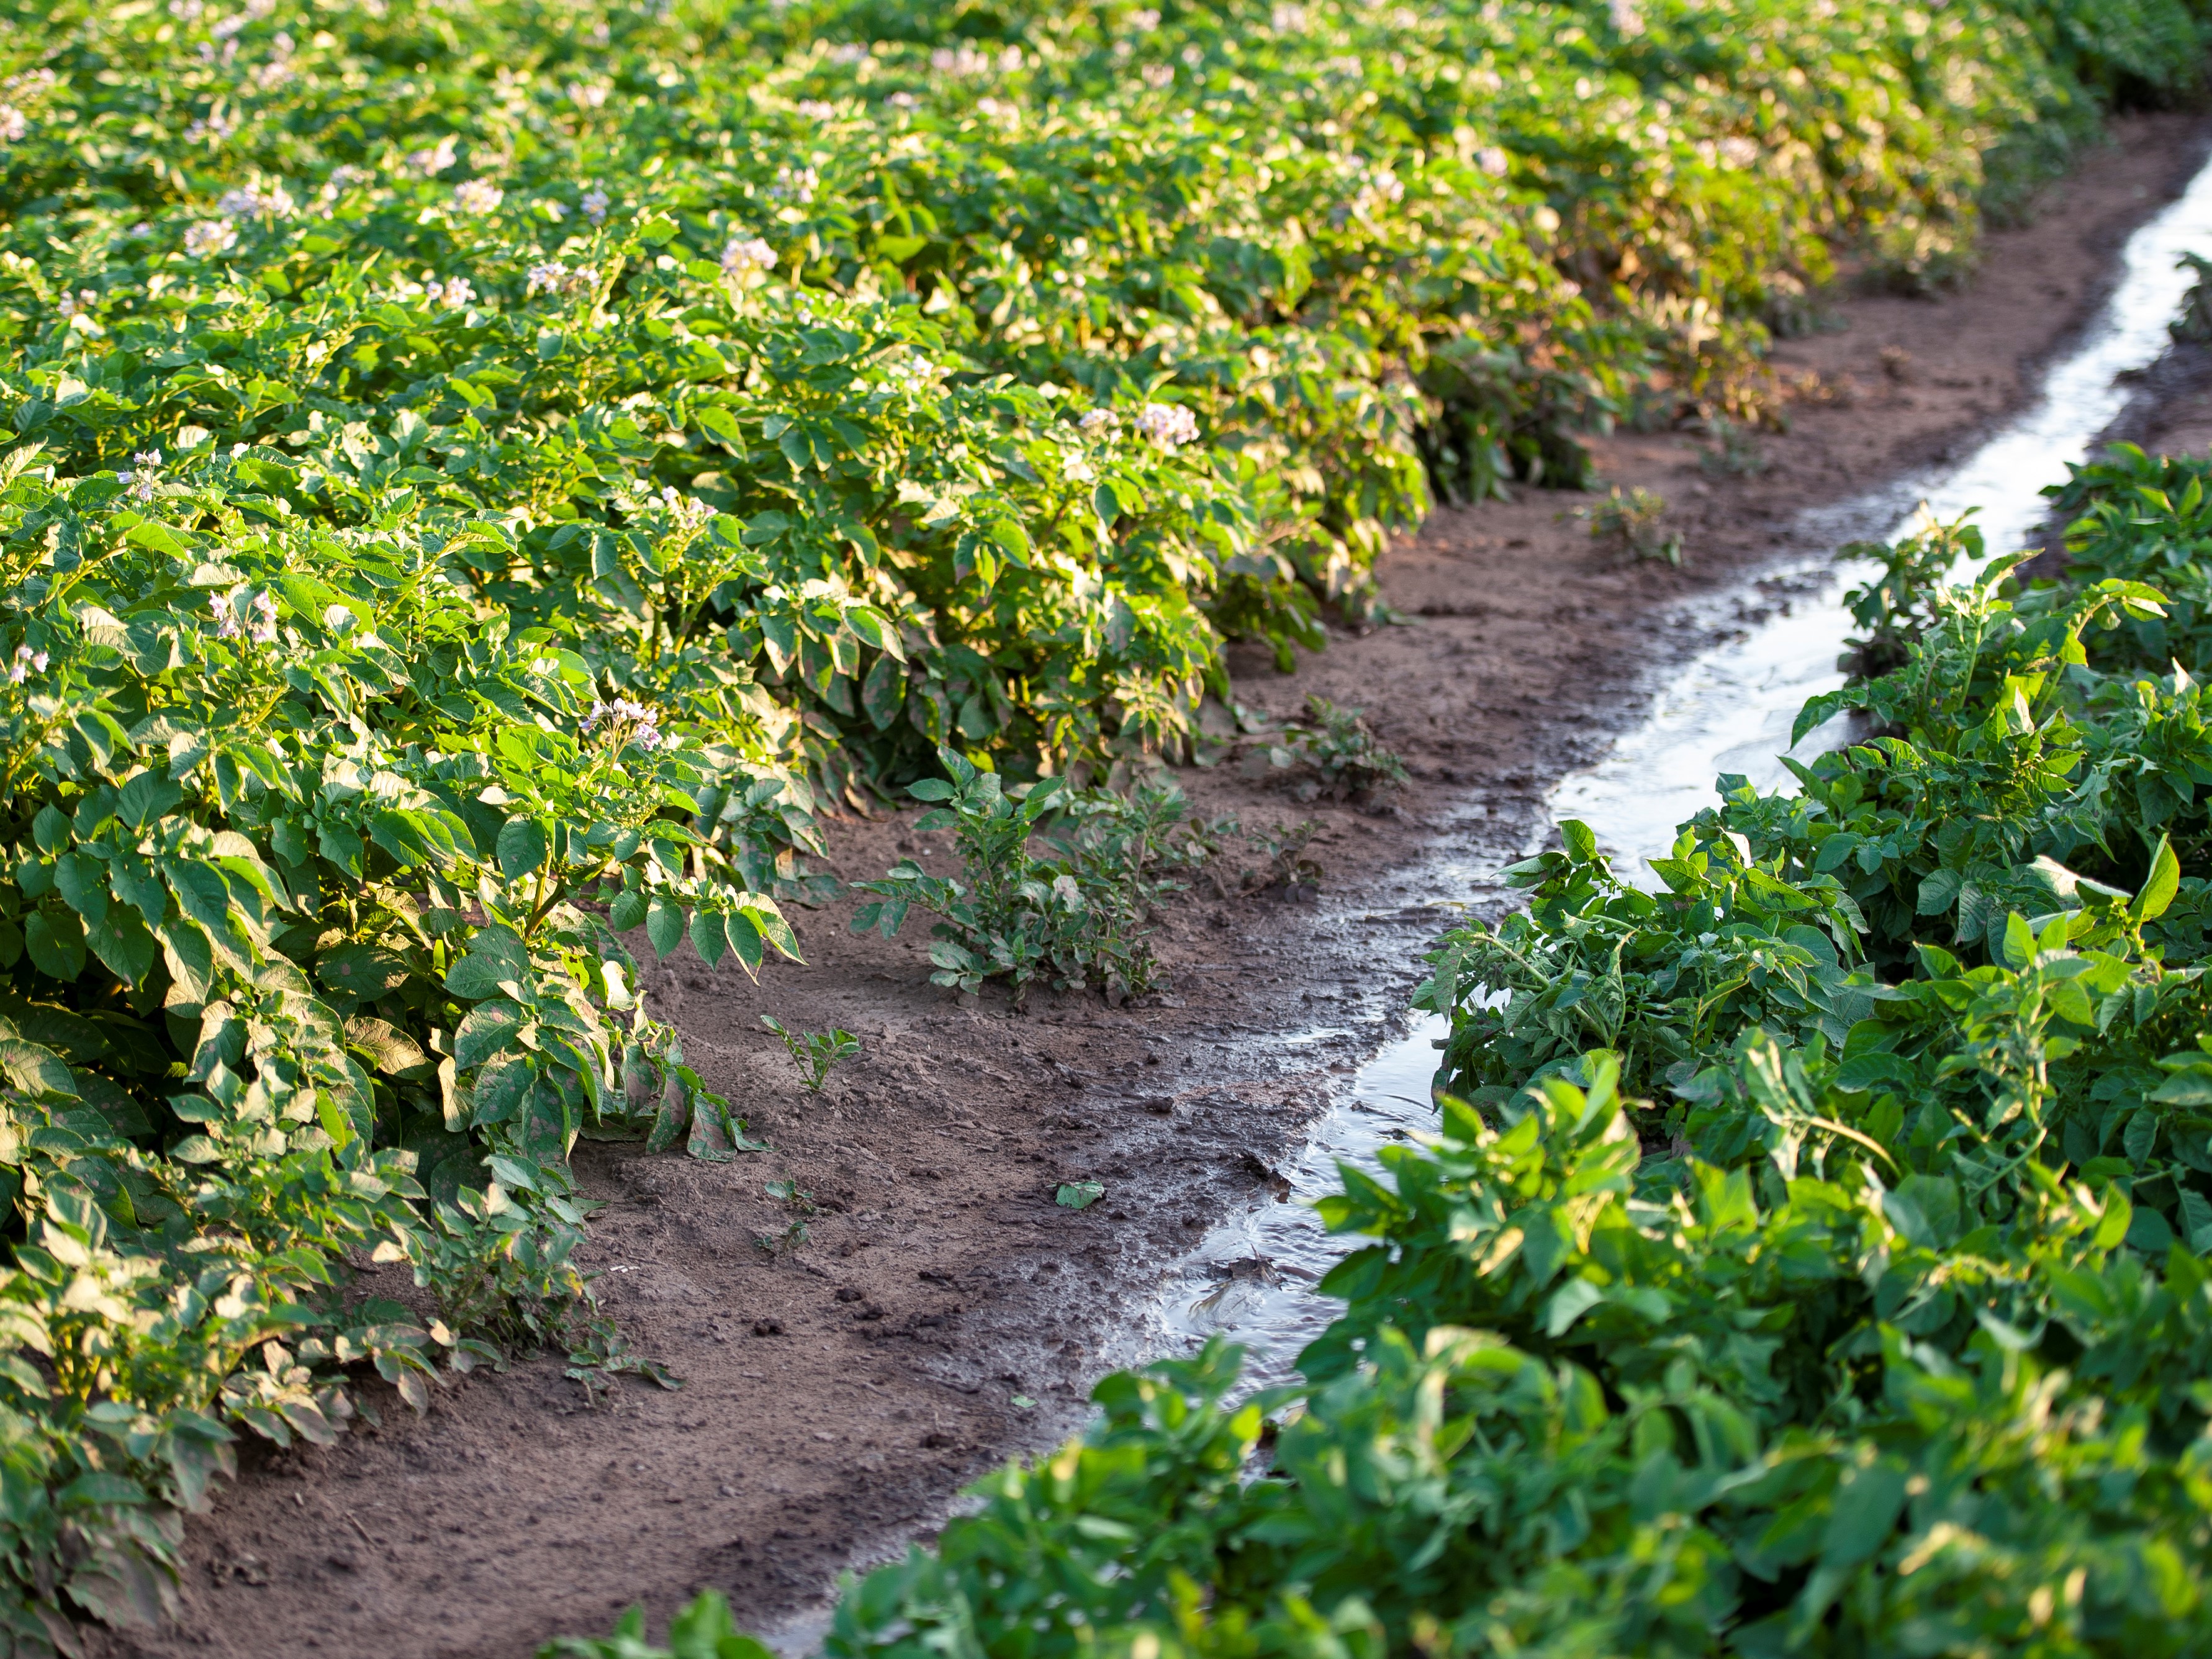 Irrigation of potatoes in a field in Whittington, Staffordshire